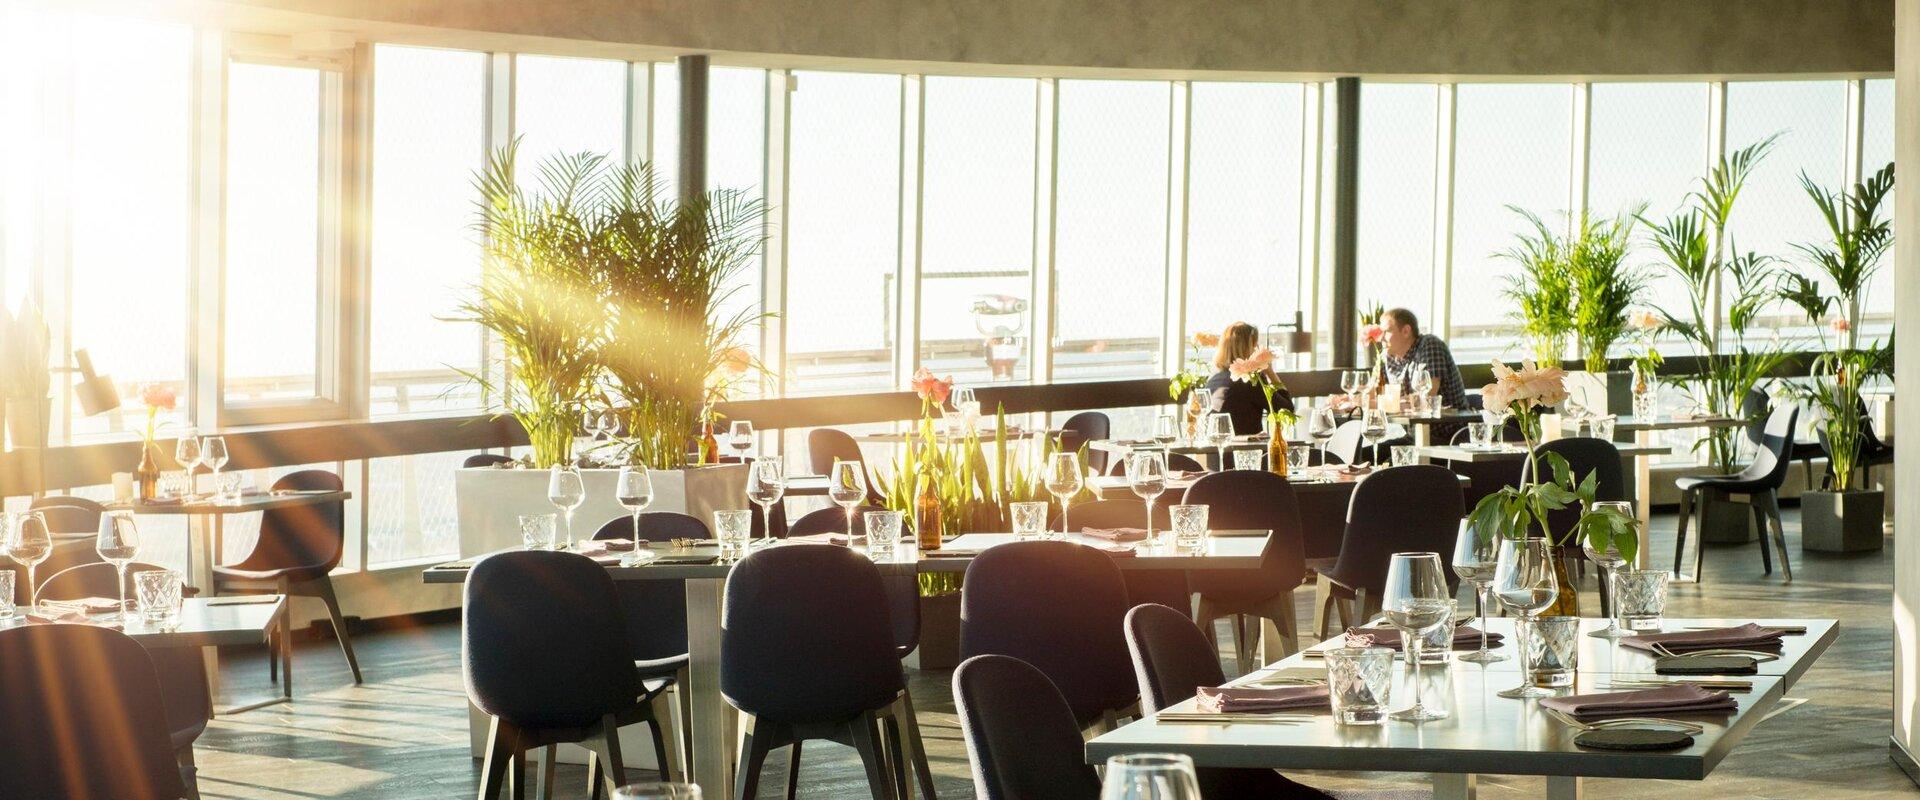 Situated 175 m from the ground, the café-restaurant on the 22nd floor offers the best view of Tallinn and beyond. The cosy café-restaurant offers famo